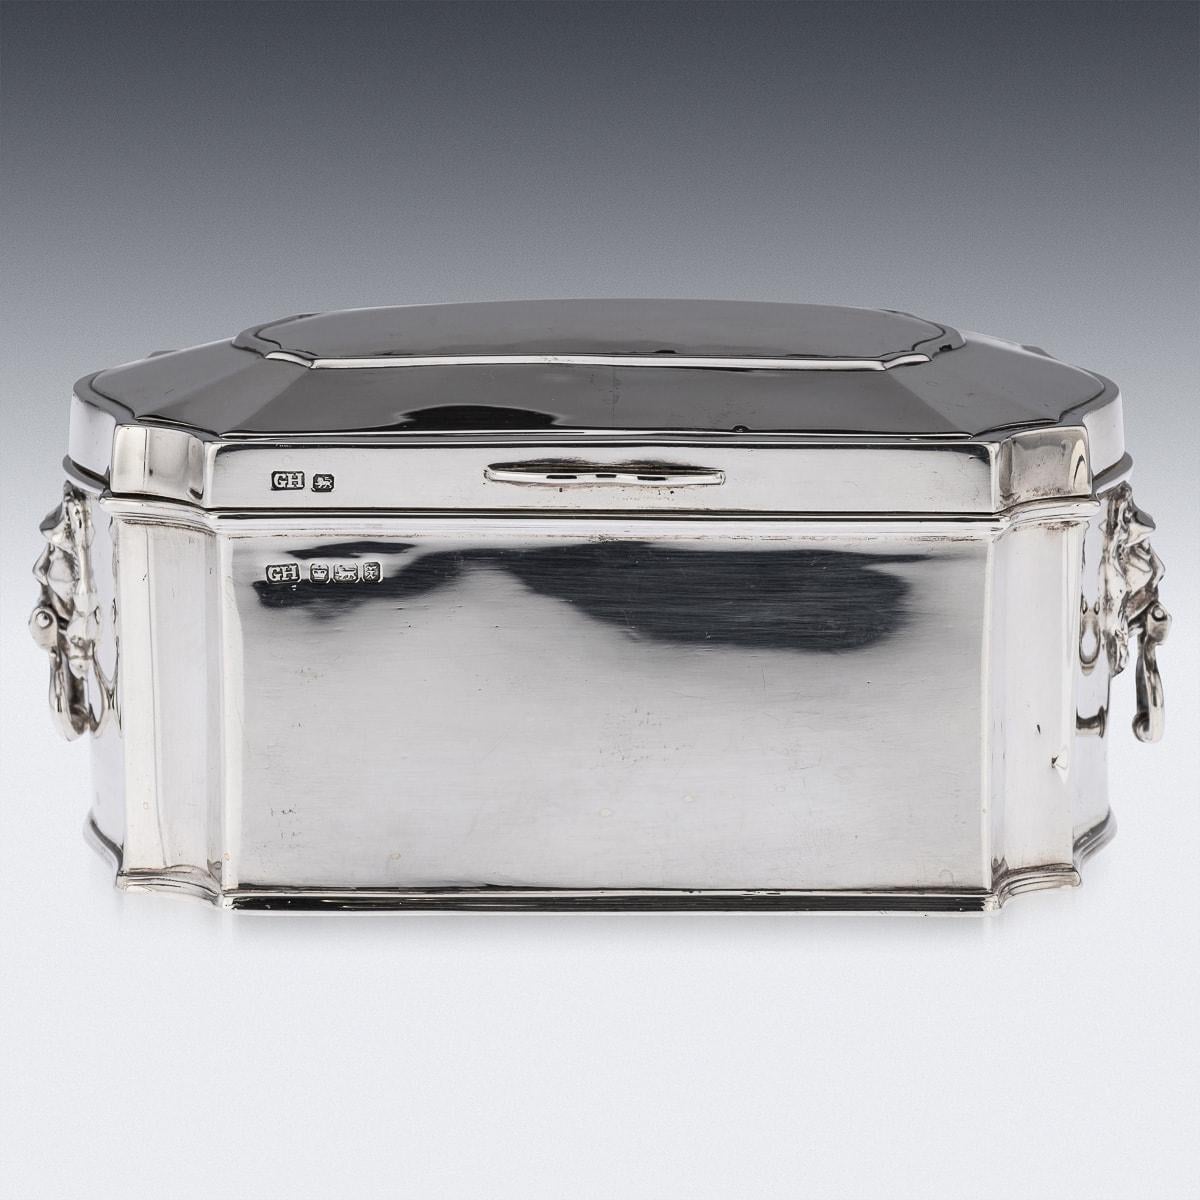 Antique early 20th Century English solid silver casket. it is a blank canvas in that he interior is completely unlined but for some faint traces of the original gilding to help protect the original contents. it would comfortably hold a great